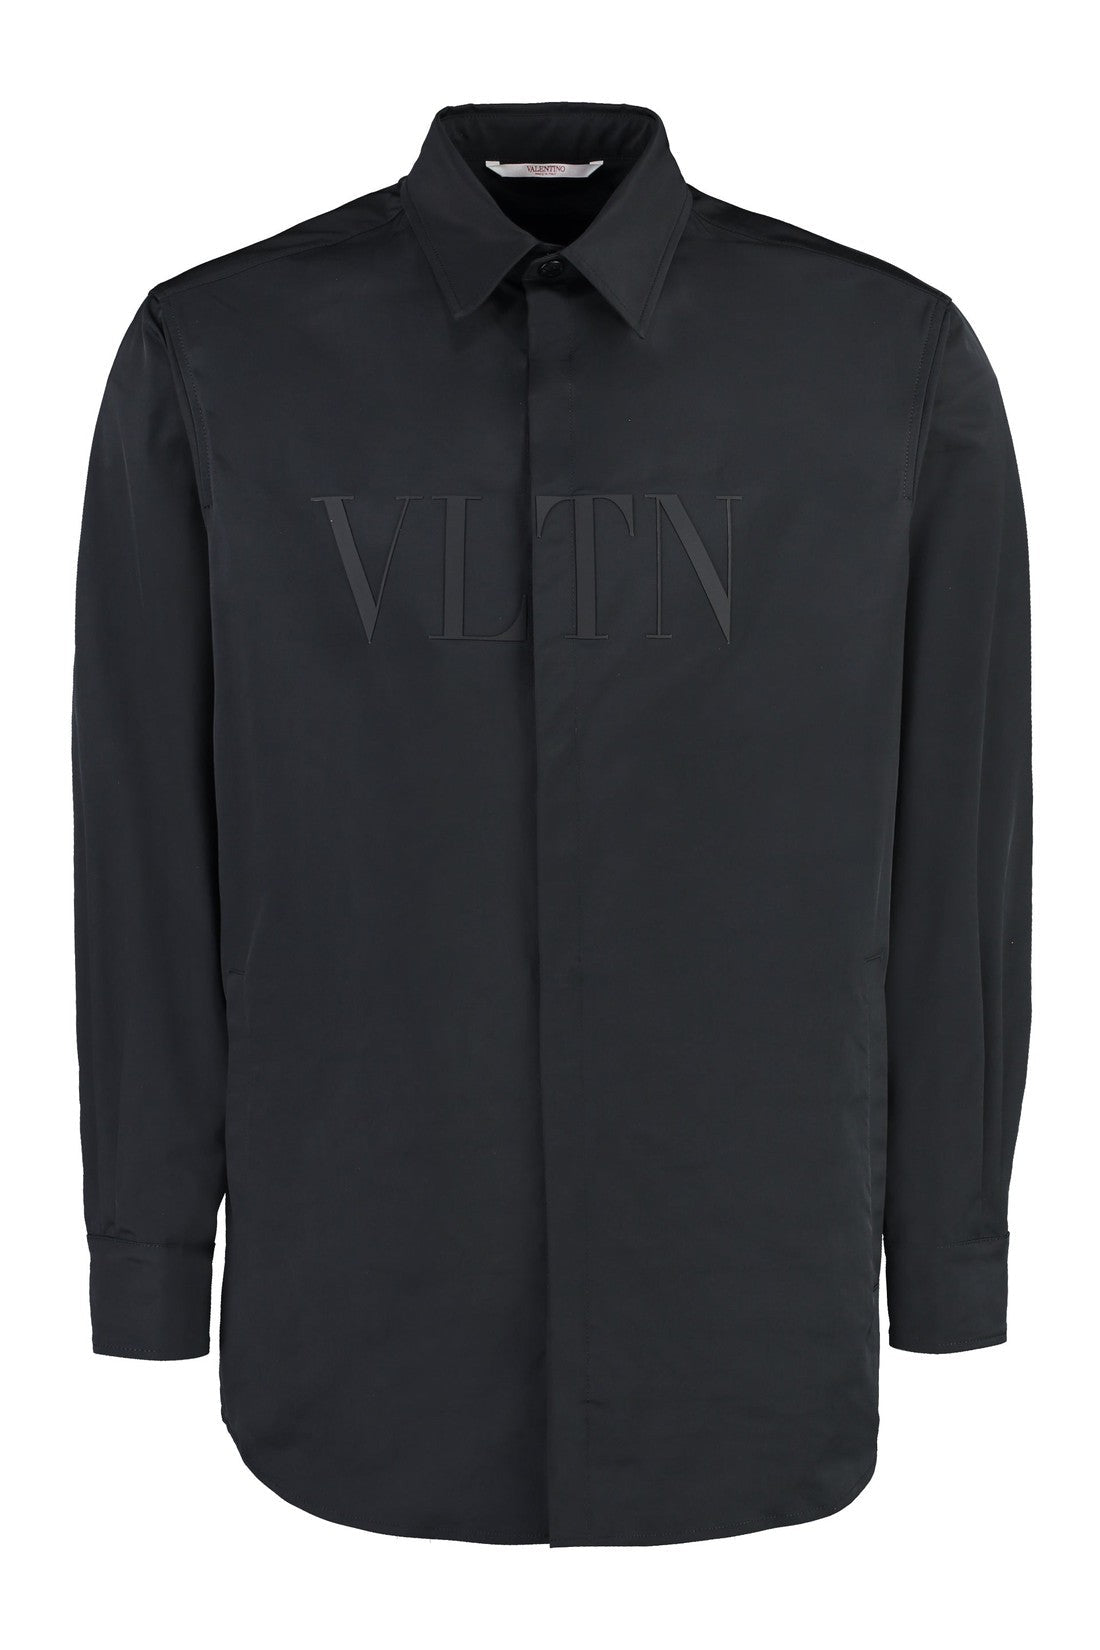 Valentino-OUTLET-SALE-Technical fabric overshirt-ARCHIVIST